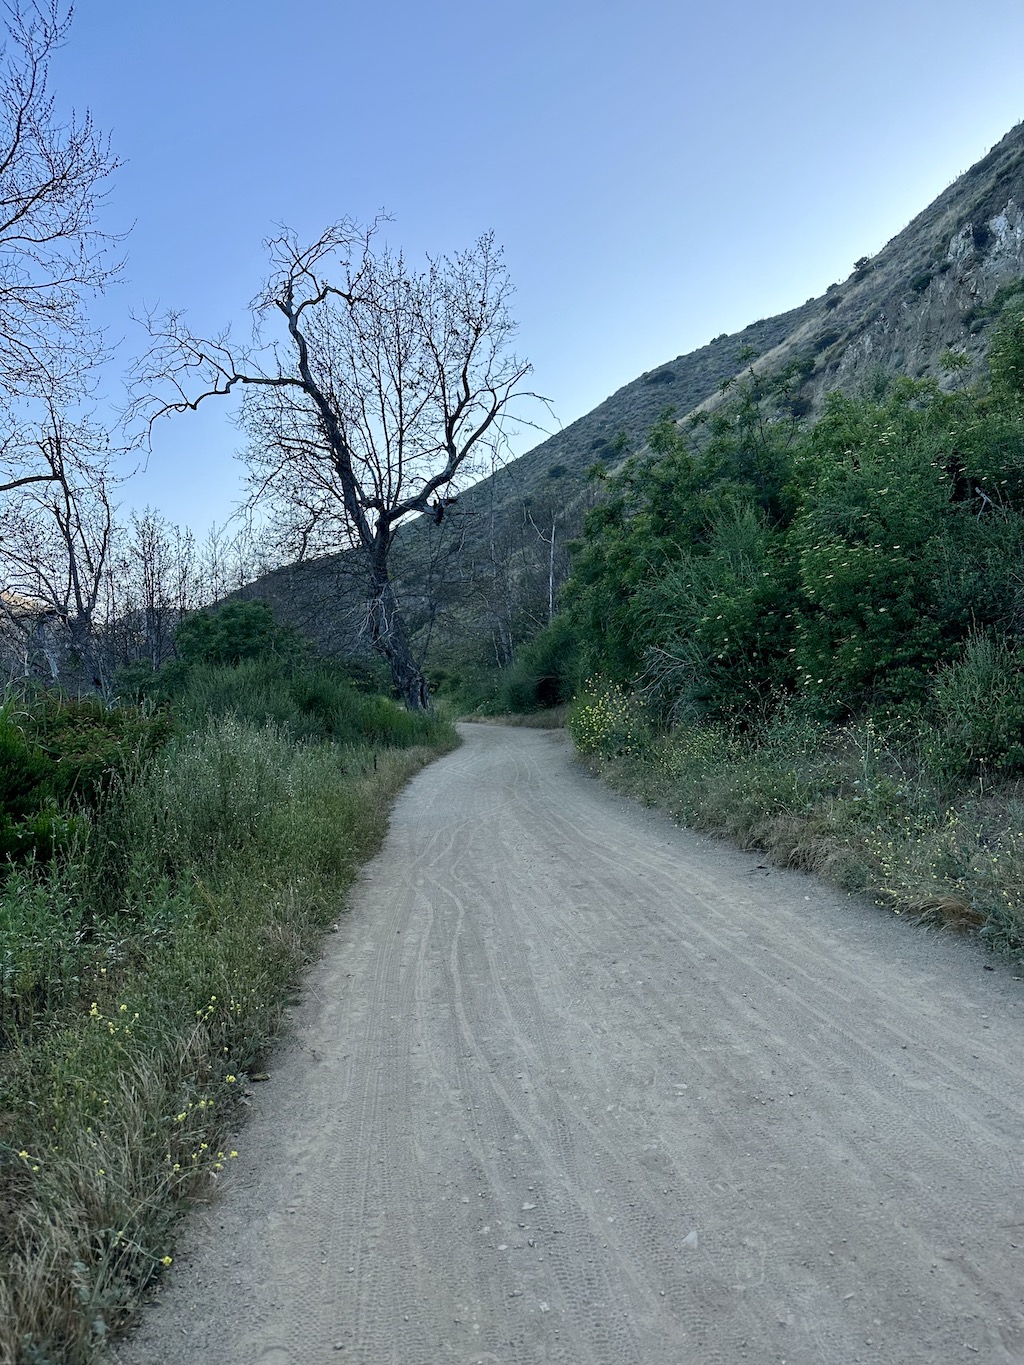 Sycamore Canyon Road in Point Mugu State Park